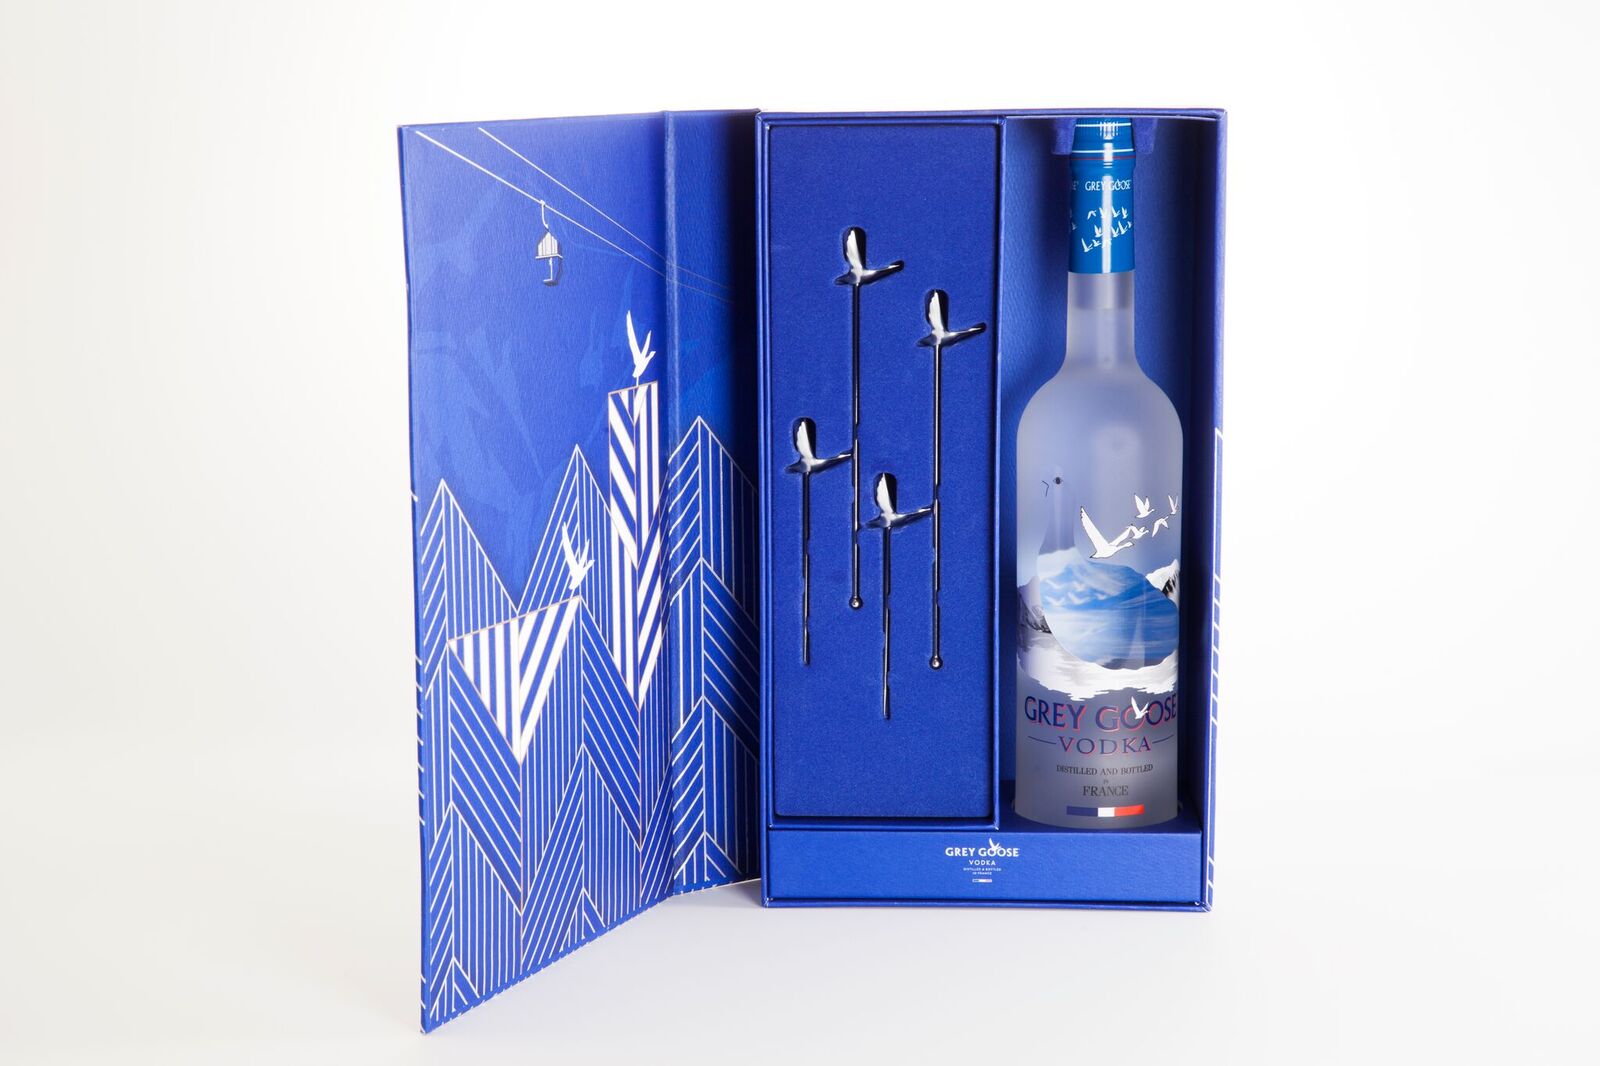 The Grey Goose Holiday Gift Set